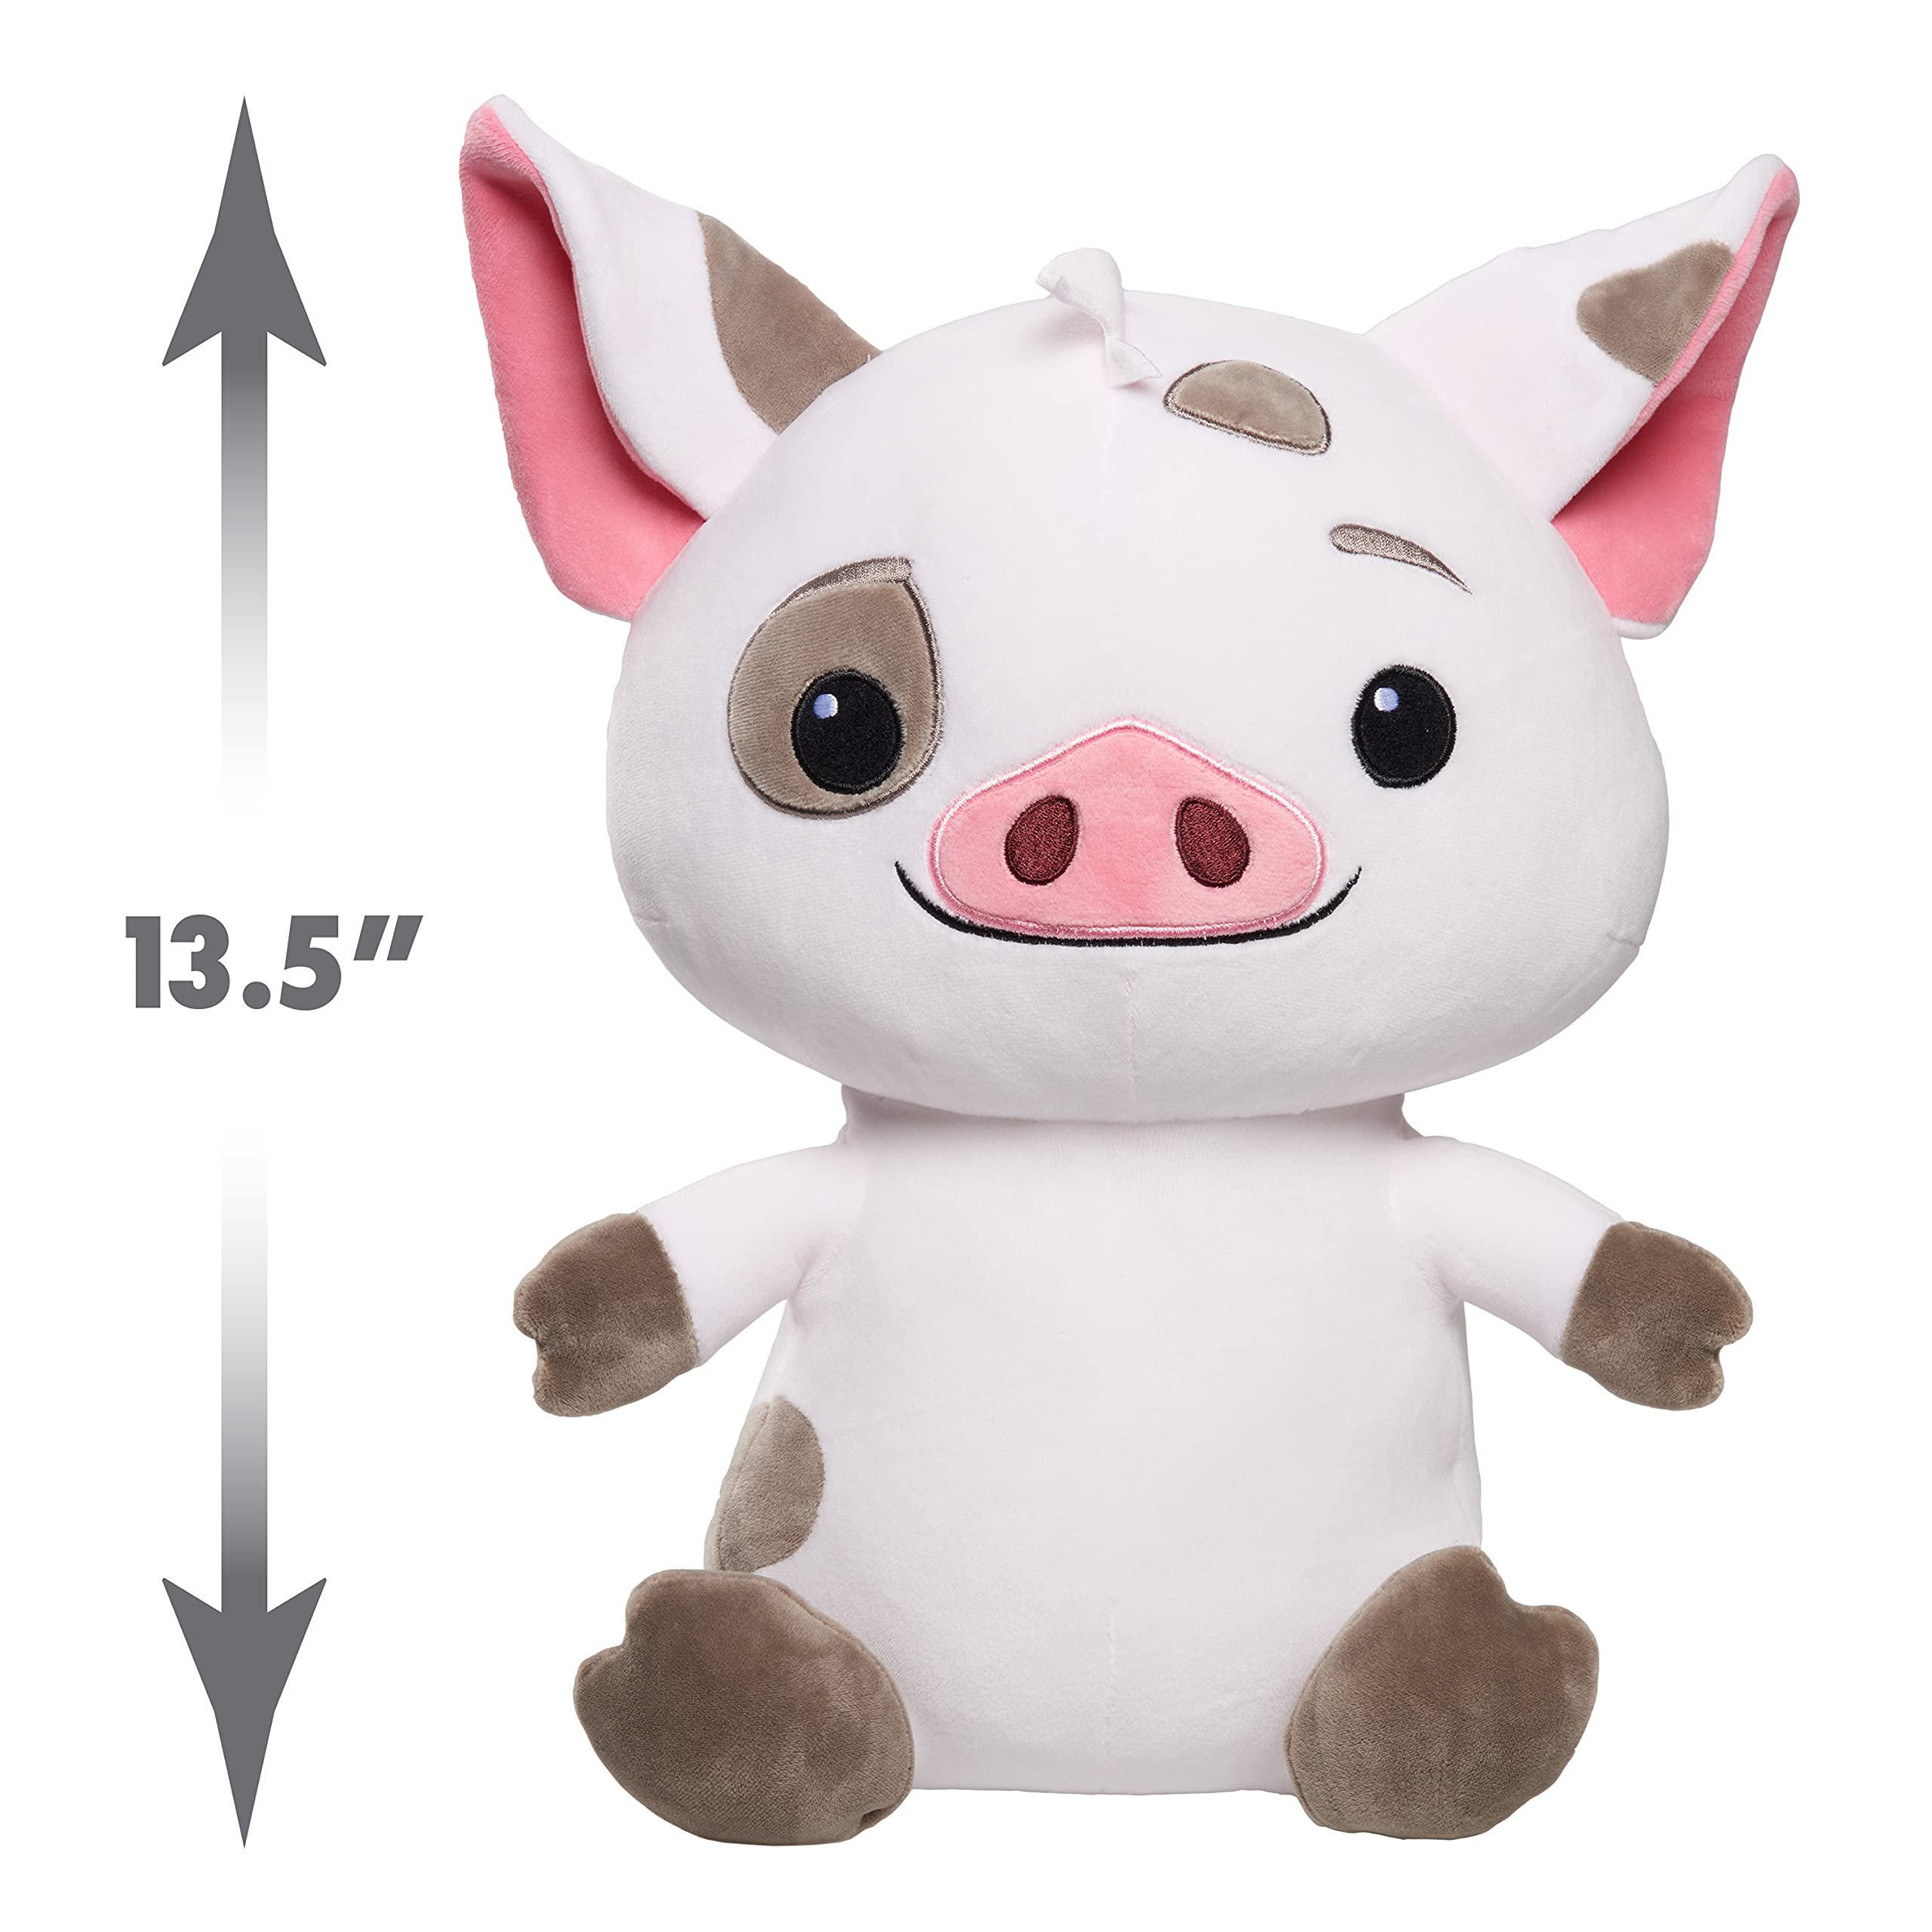 Disney Princess Moana Pua 14-Inch Weighted Plushie Stuffed Animal, Pig, Approximately 2 Pounds, Officially Licensed Kids Toys for Ages 3 Up, Gifts and Presents by Just Play